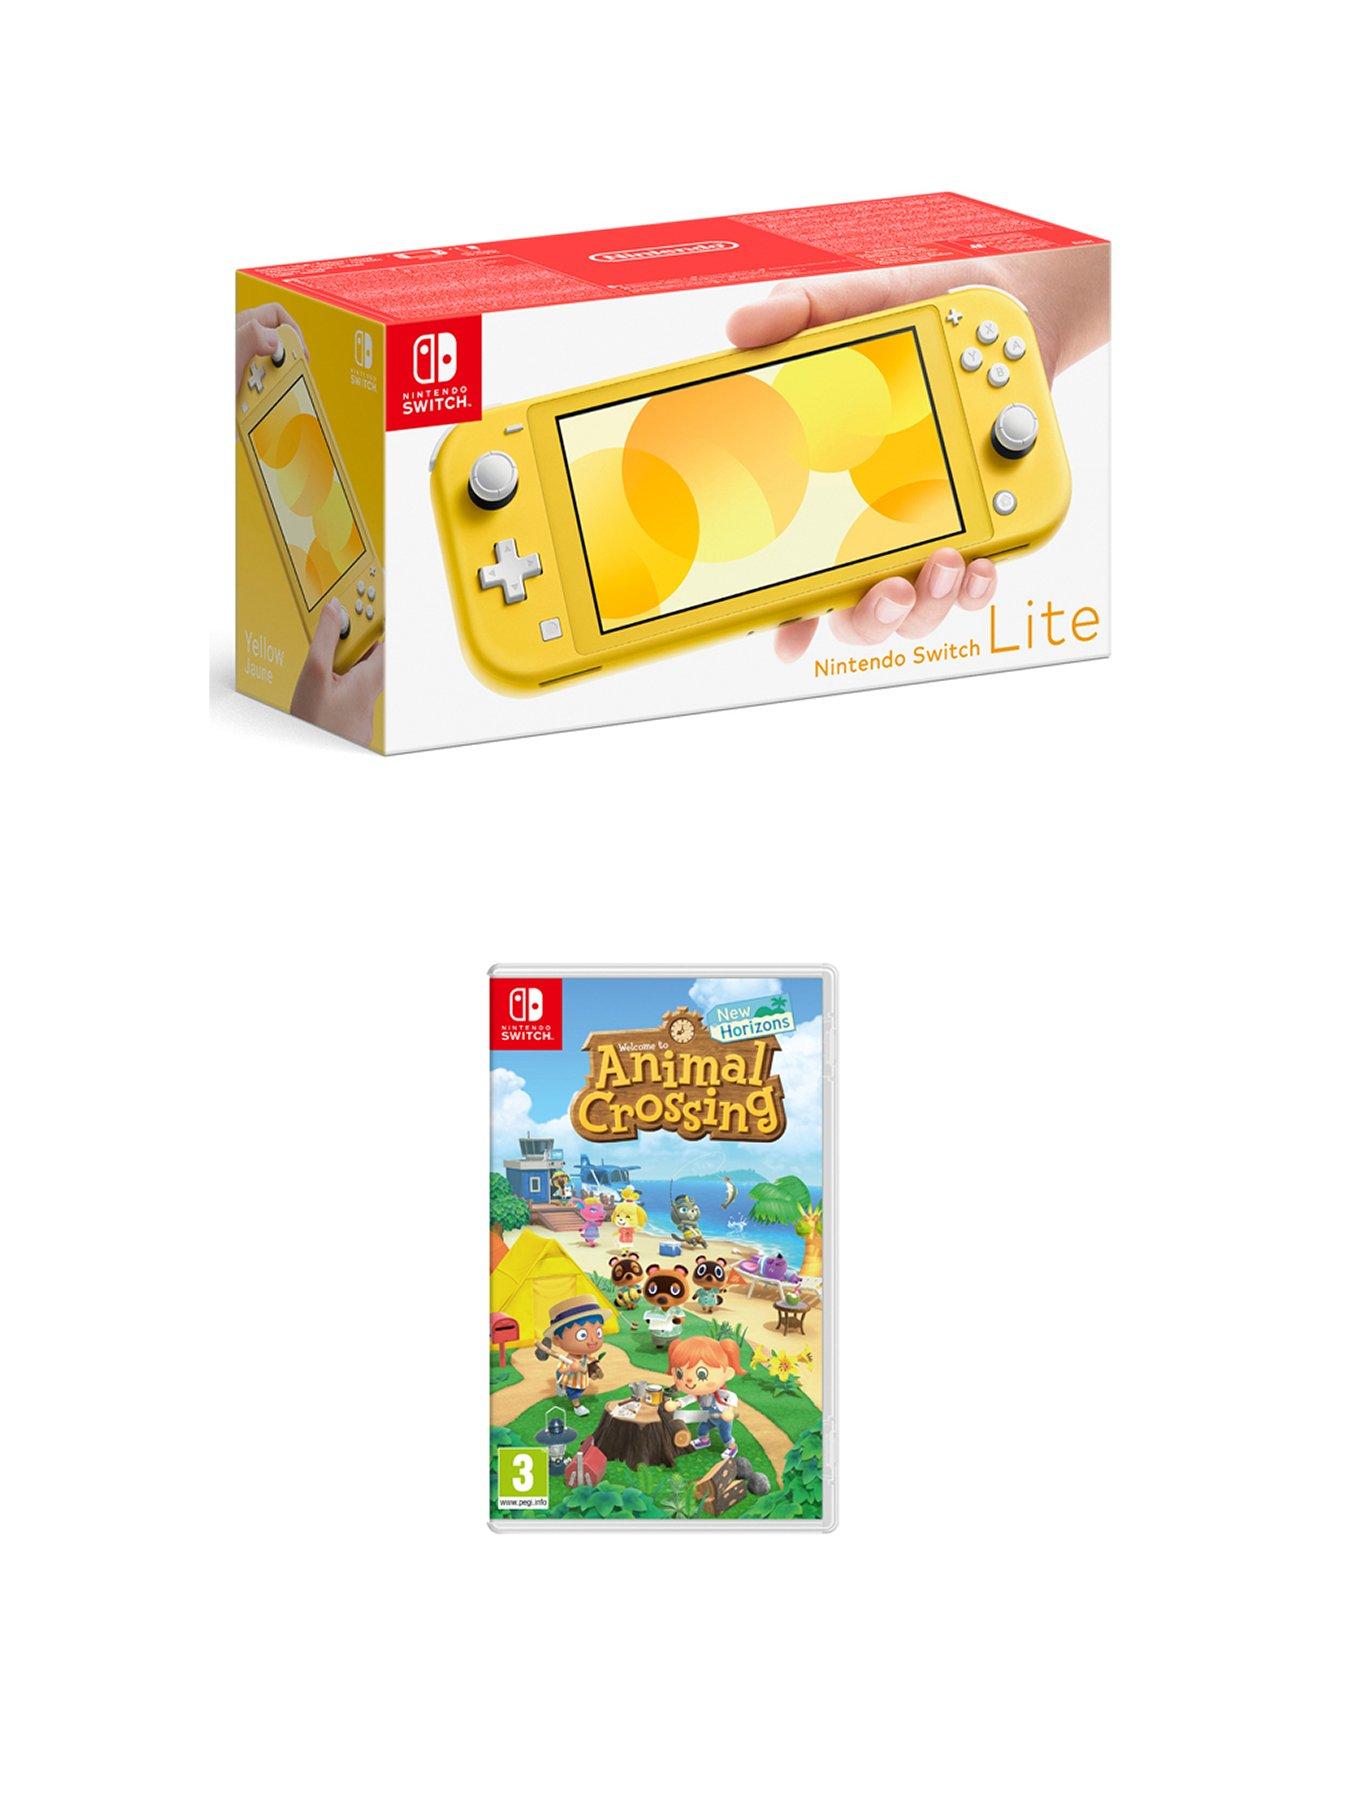 can you play animal crossing on switch lite without wifi